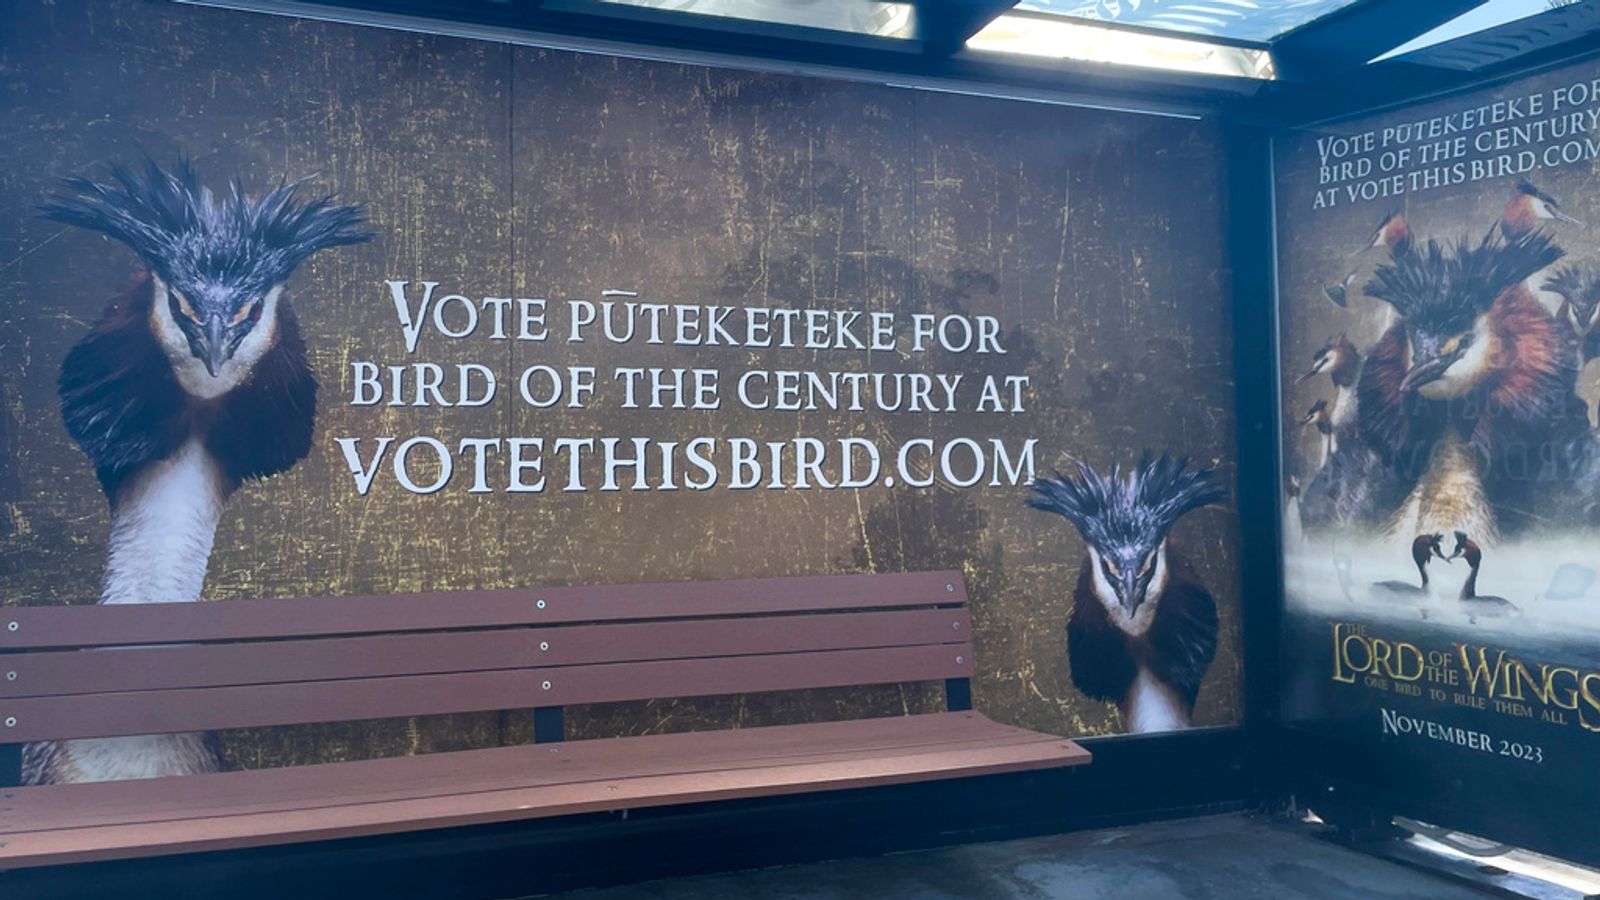 Outsider wins bird of the century for its 'propensity for puking